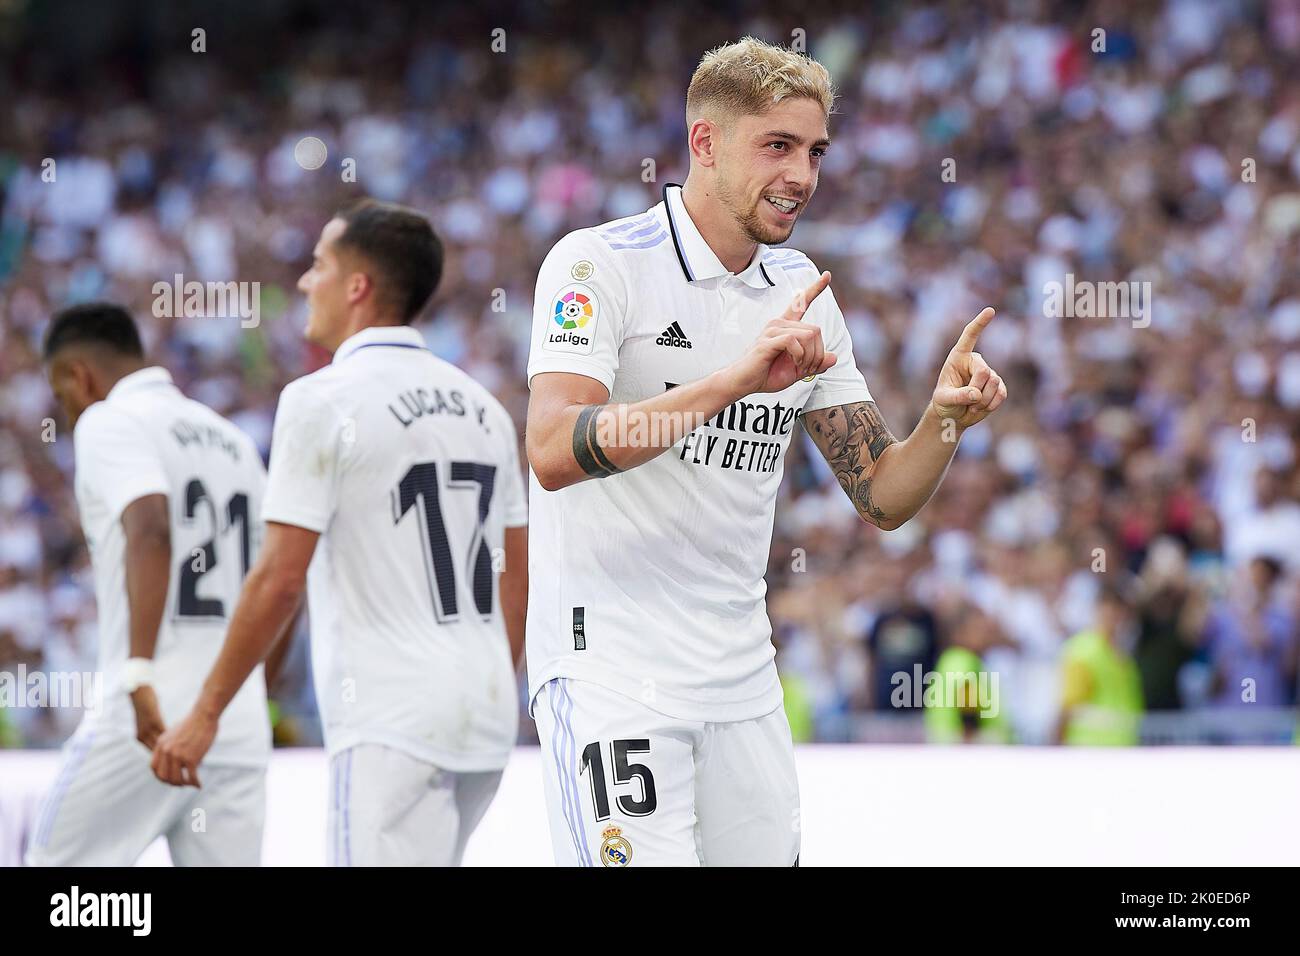 Madrid, Spain. 11th Sep, 2022. Federico Valverde of Real Madrid celebrates after scoring goal during the La Liga match between Real Madrid and RCD Mallorca played at Santiago Bernabeu Stadium on September 11, 2022 in Madrid, Spain. (Photo by Ruben Albarran / PRESSIN) Credit: PRESSINPHOTO SPORTS AGENCY/Alamy Live News Stock Photo